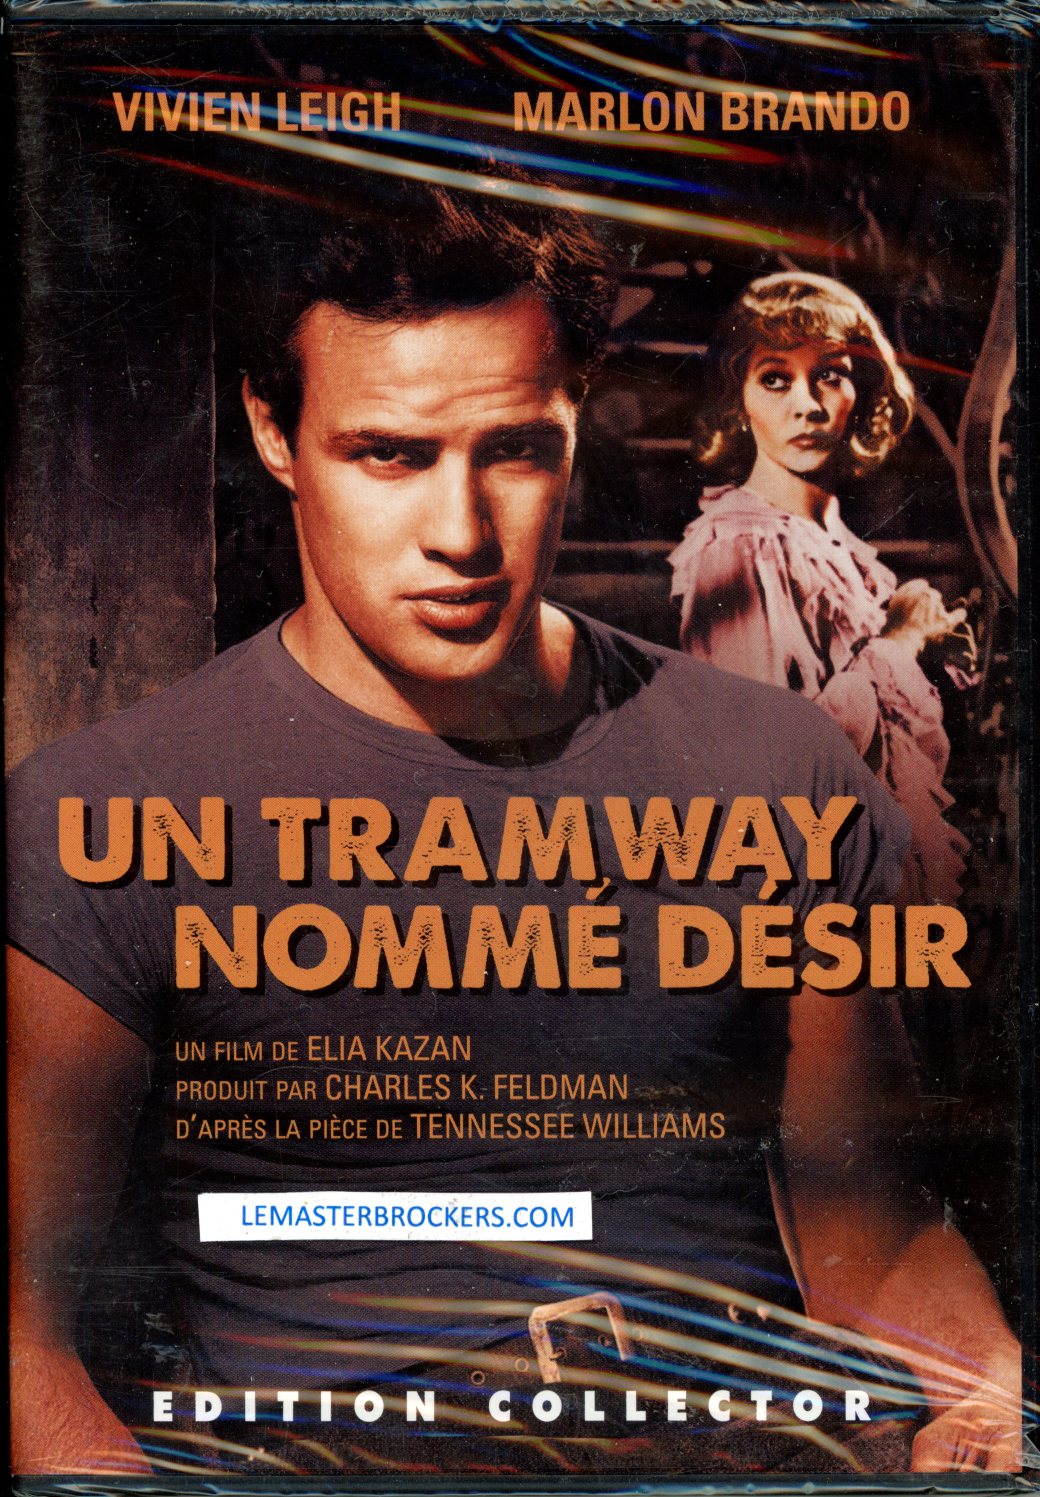 UN TRAMWAY NOMME DESIR EDITION COLLECTOR DVD NEUF 7321950389322